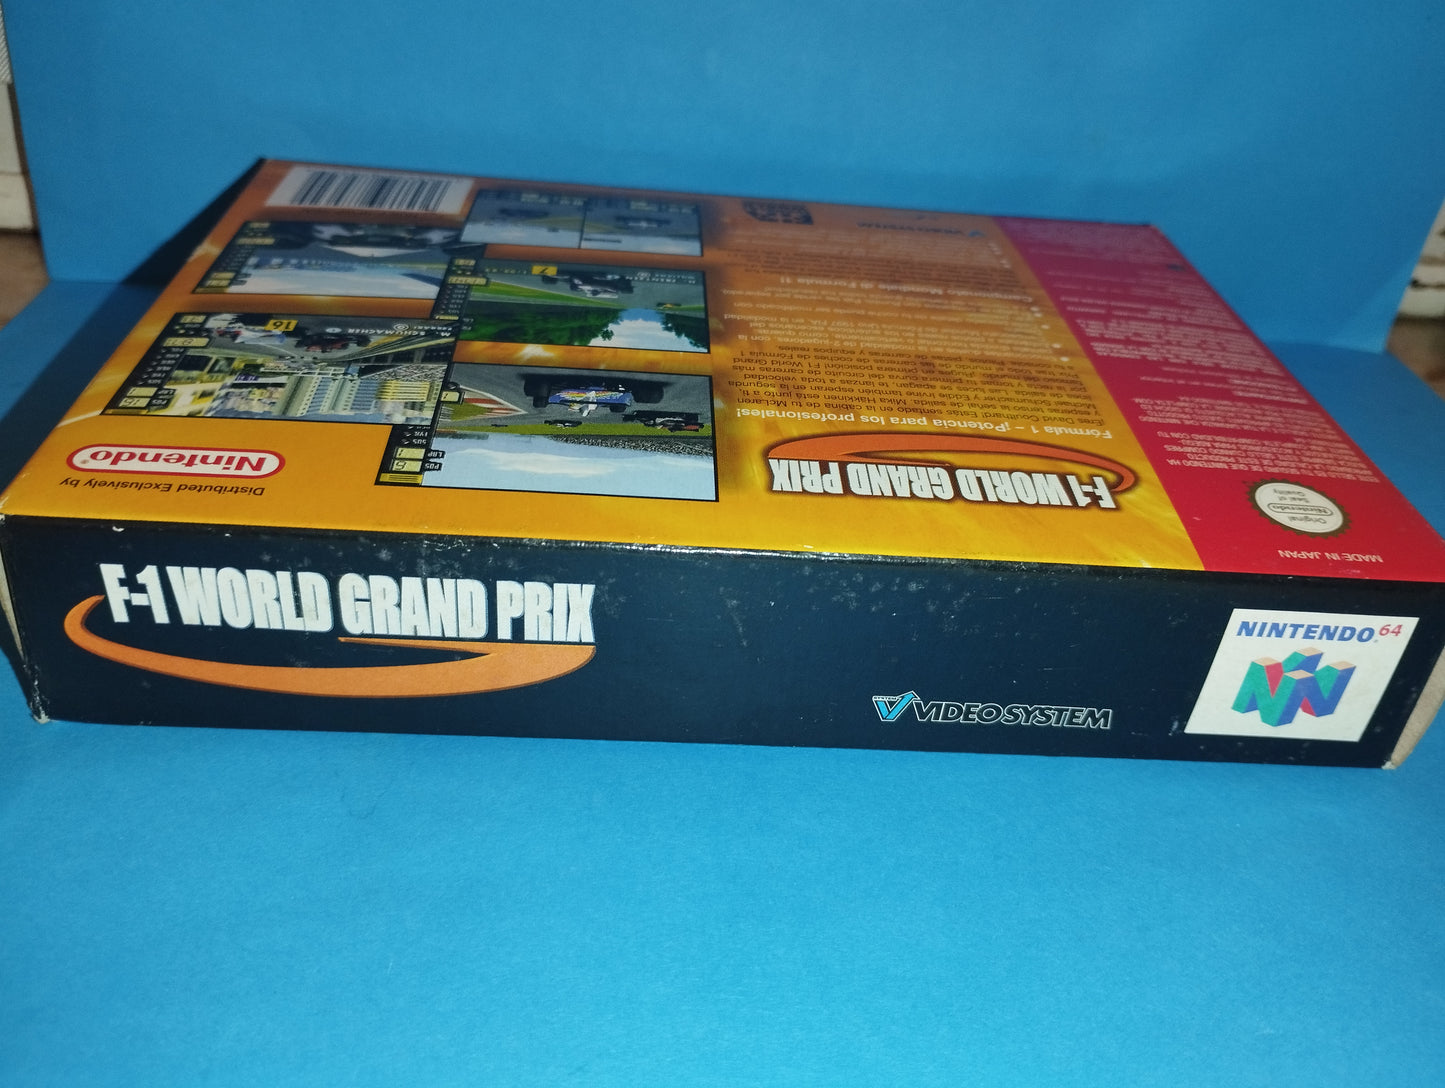 Nintendo 64 Game F-1 World Grand Prix
 Published in 1998